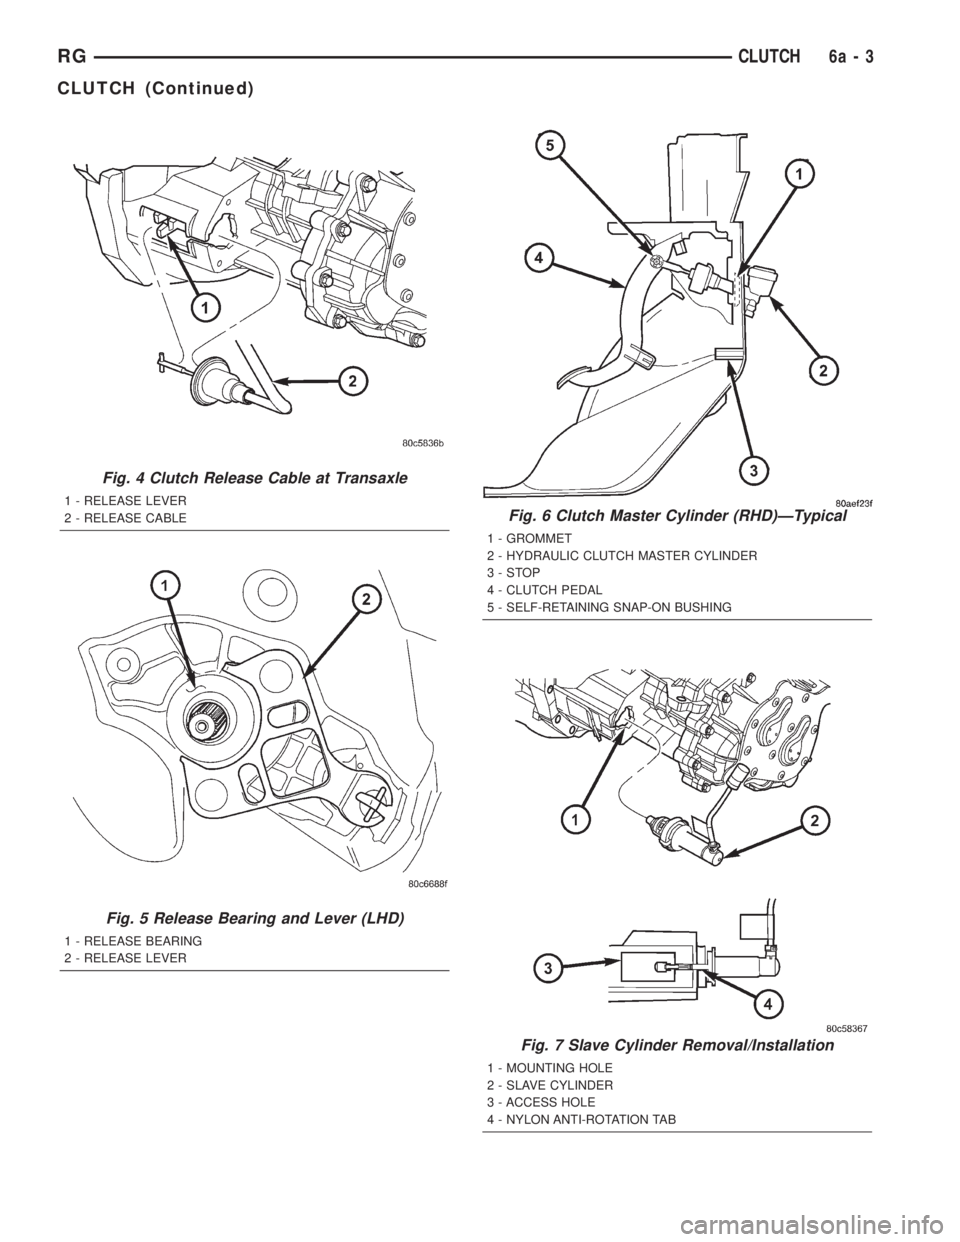 CHRYSLER VOYAGER 2001  Service Manual Fig. 4 Clutch Release Cable at Transaxle
1 - RELEASE LEVER
2 - RELEASE CABLE
Fig. 5 Release Bearing and Lever (LHD)
1 - RELEASE BEARING
2 - RELEASE LEVER
Fig. 6 Clutch Master Cylinder (RHD)ÐTypical
1